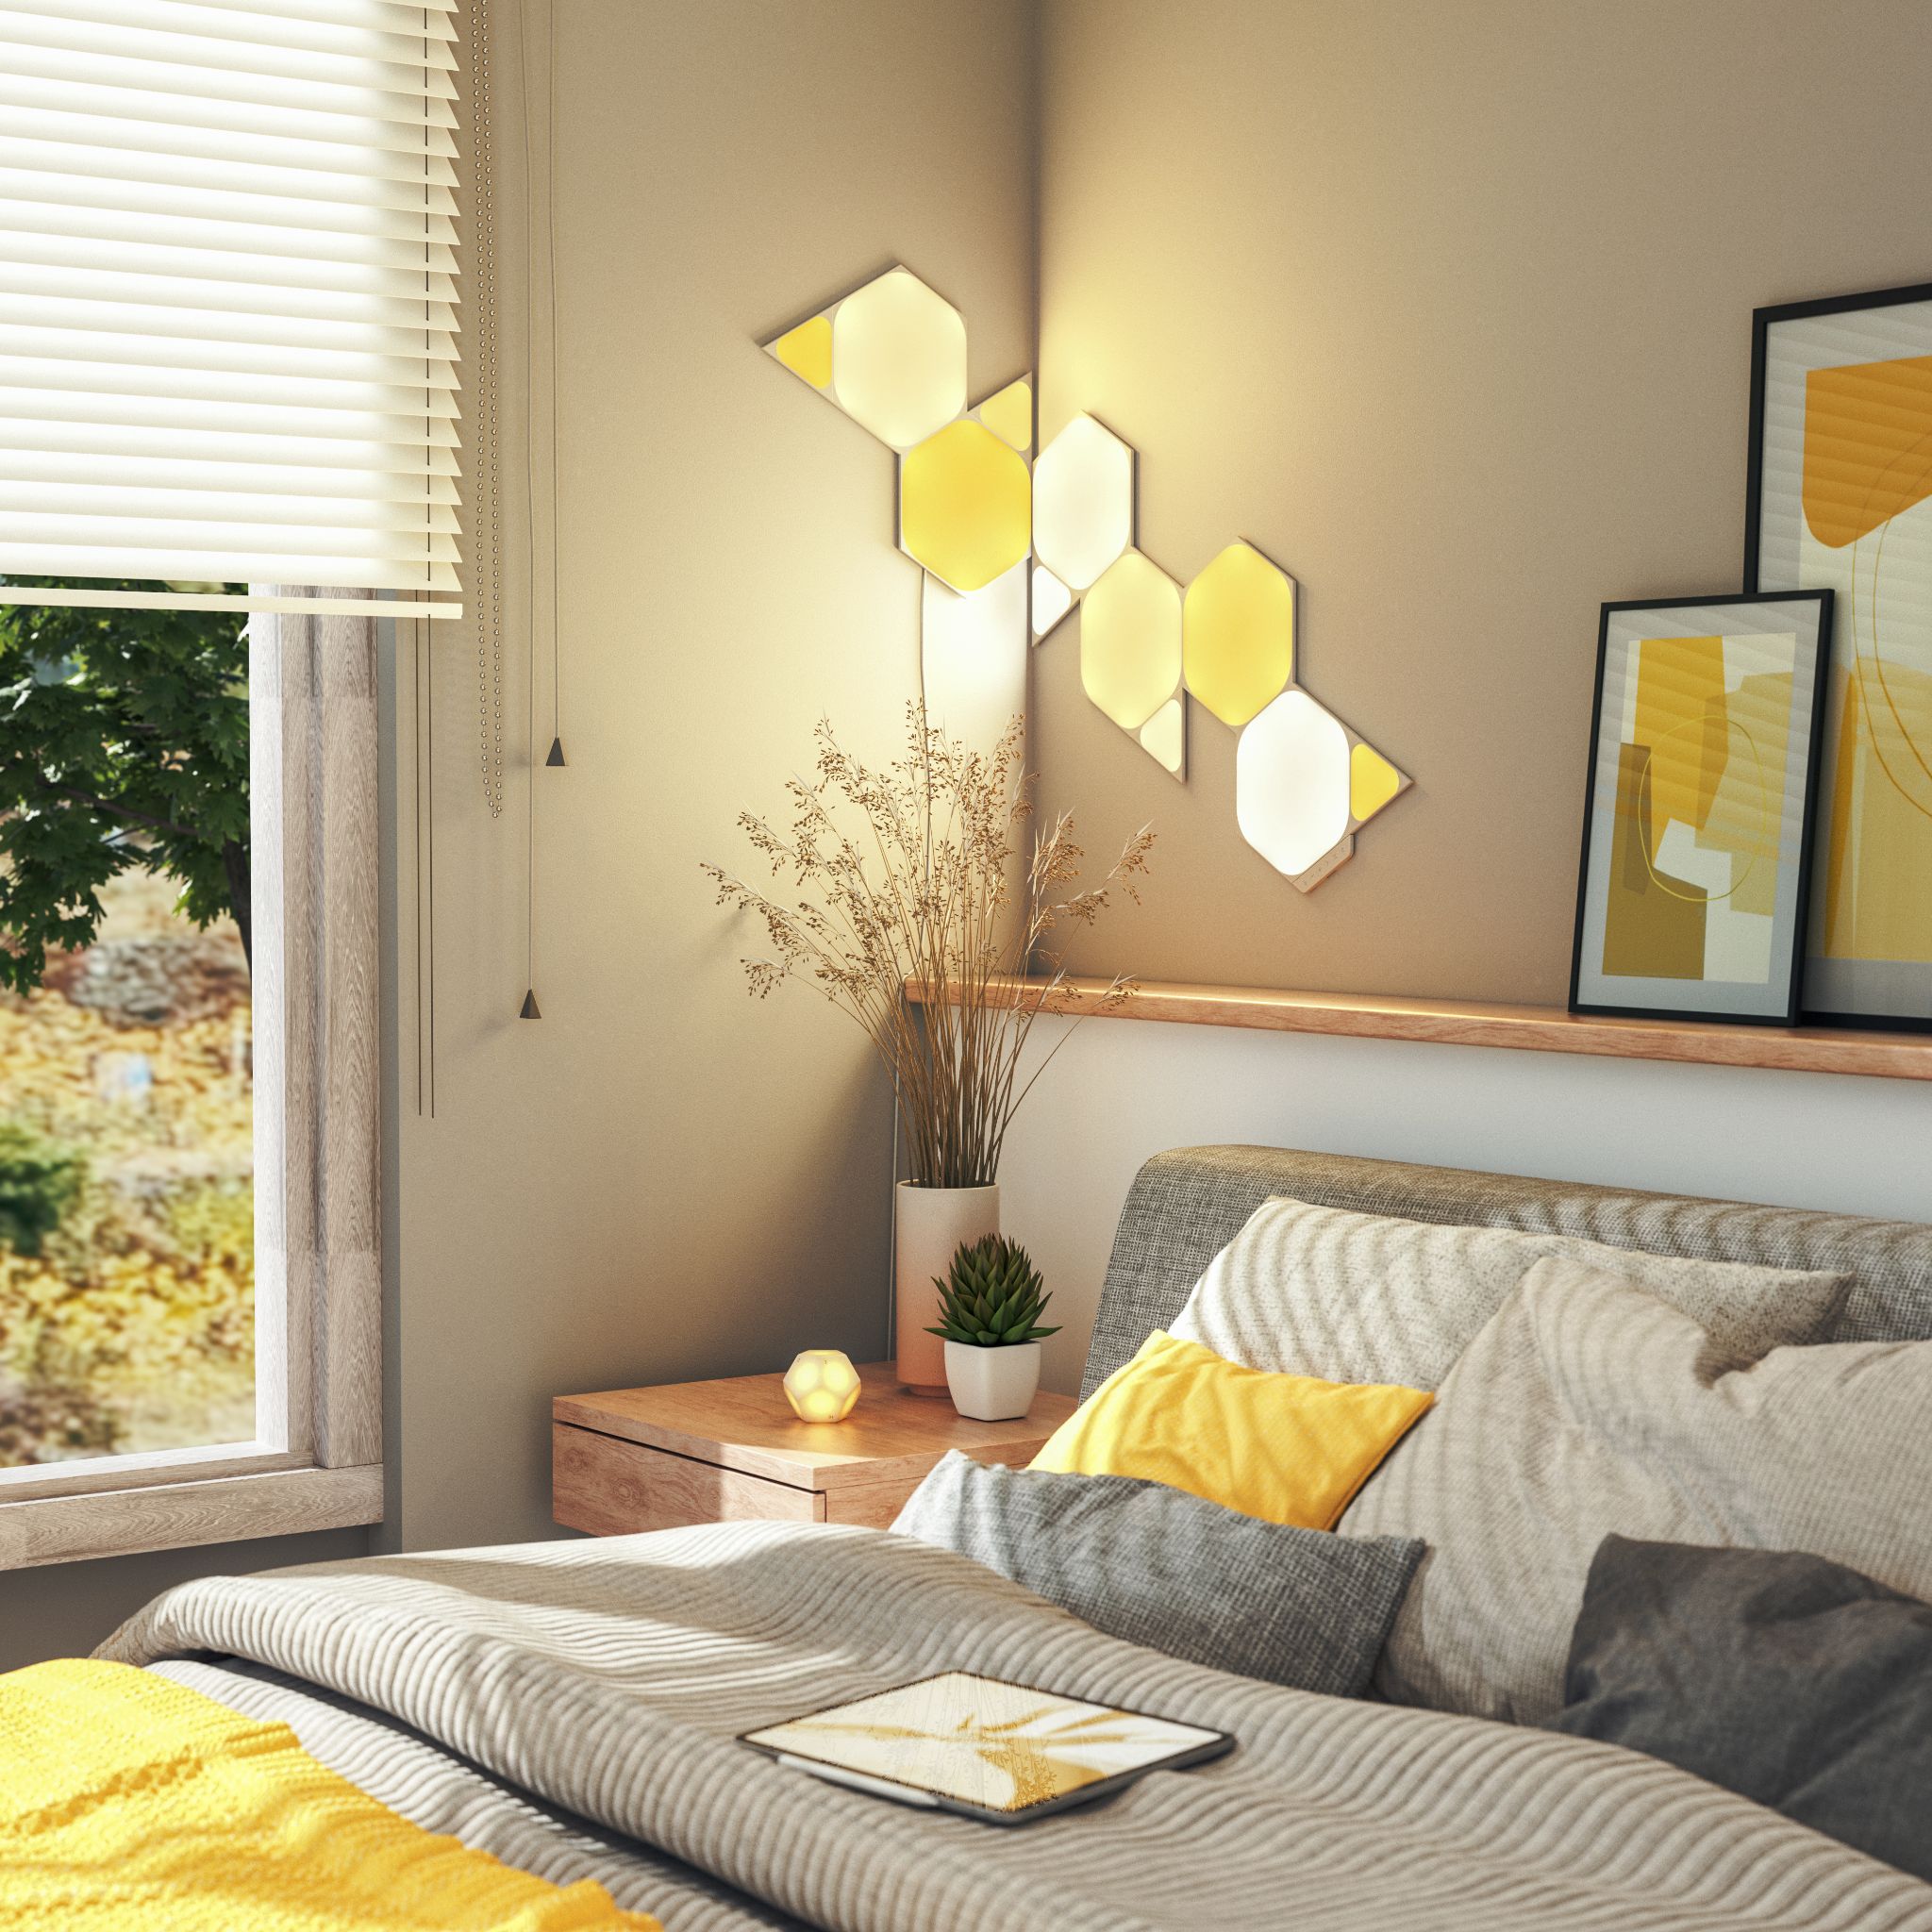 Nanoleaf Shapes in a bedroom with warm yellow lighting.